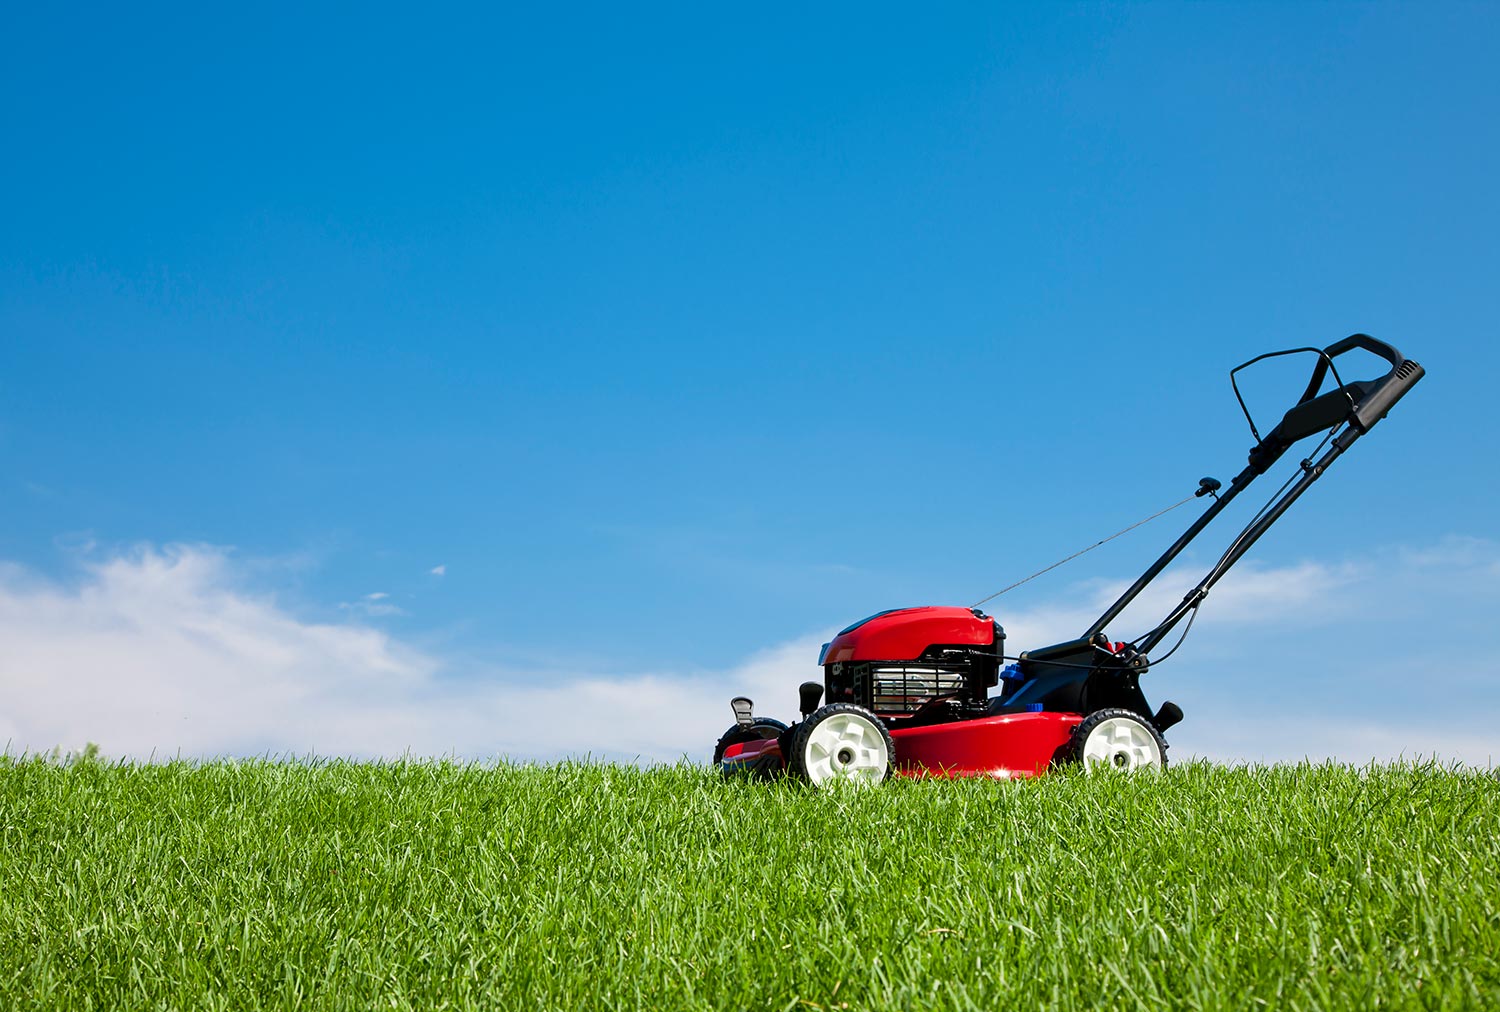 Lawn mower on lush green grass on a summer day under a blue sky